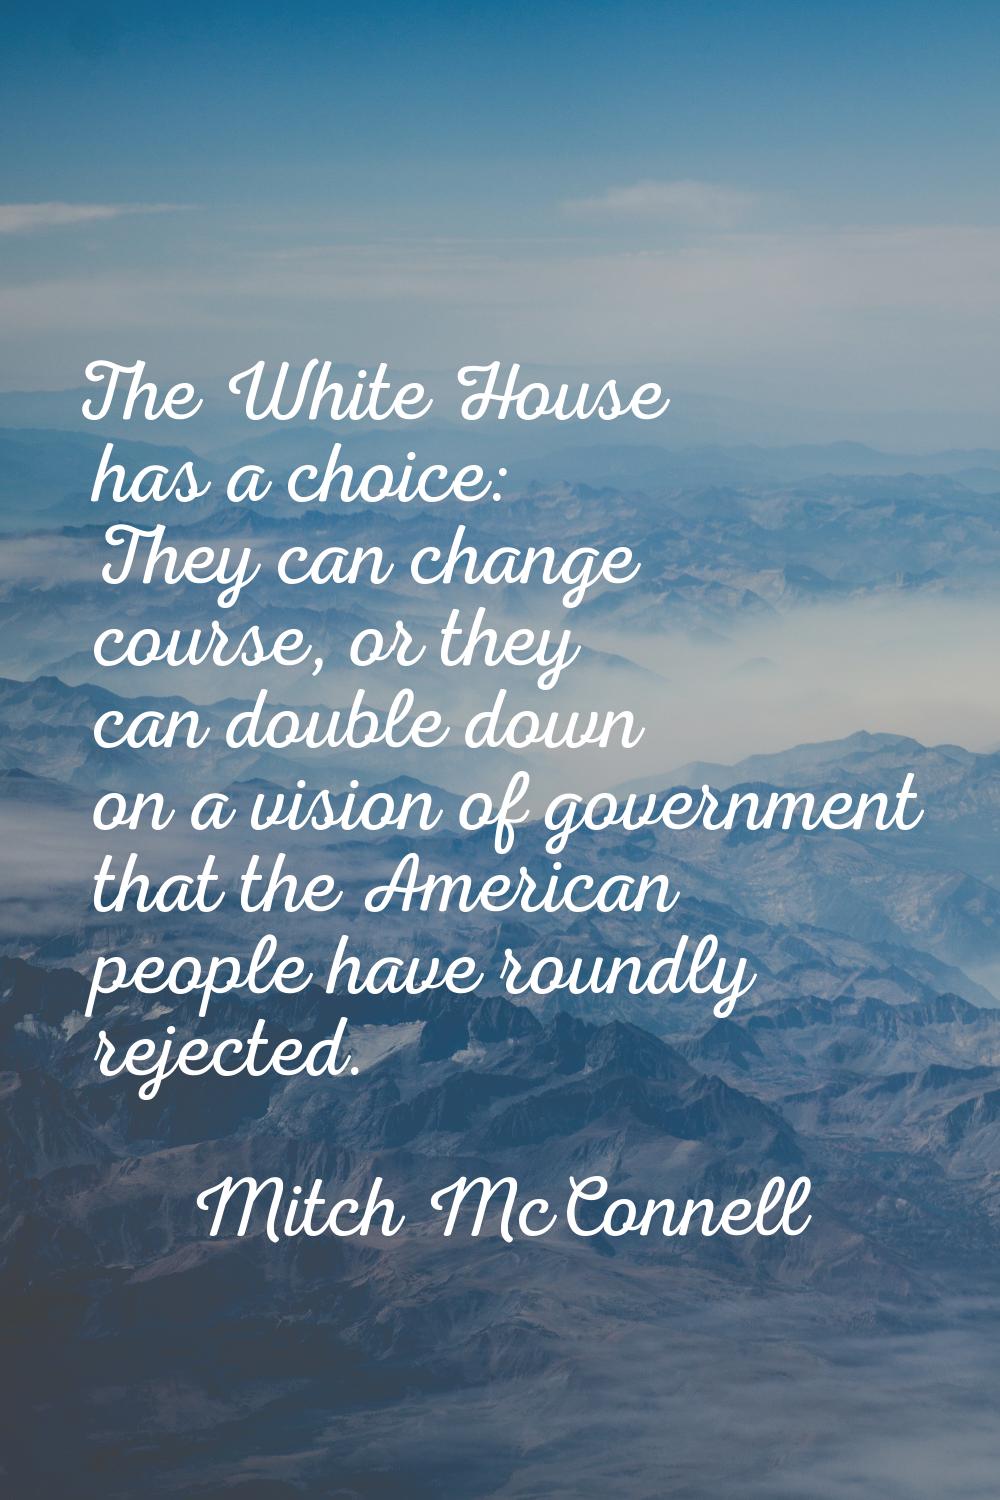 The White House has a choice: They can change course, or they can double down on a vision of govern